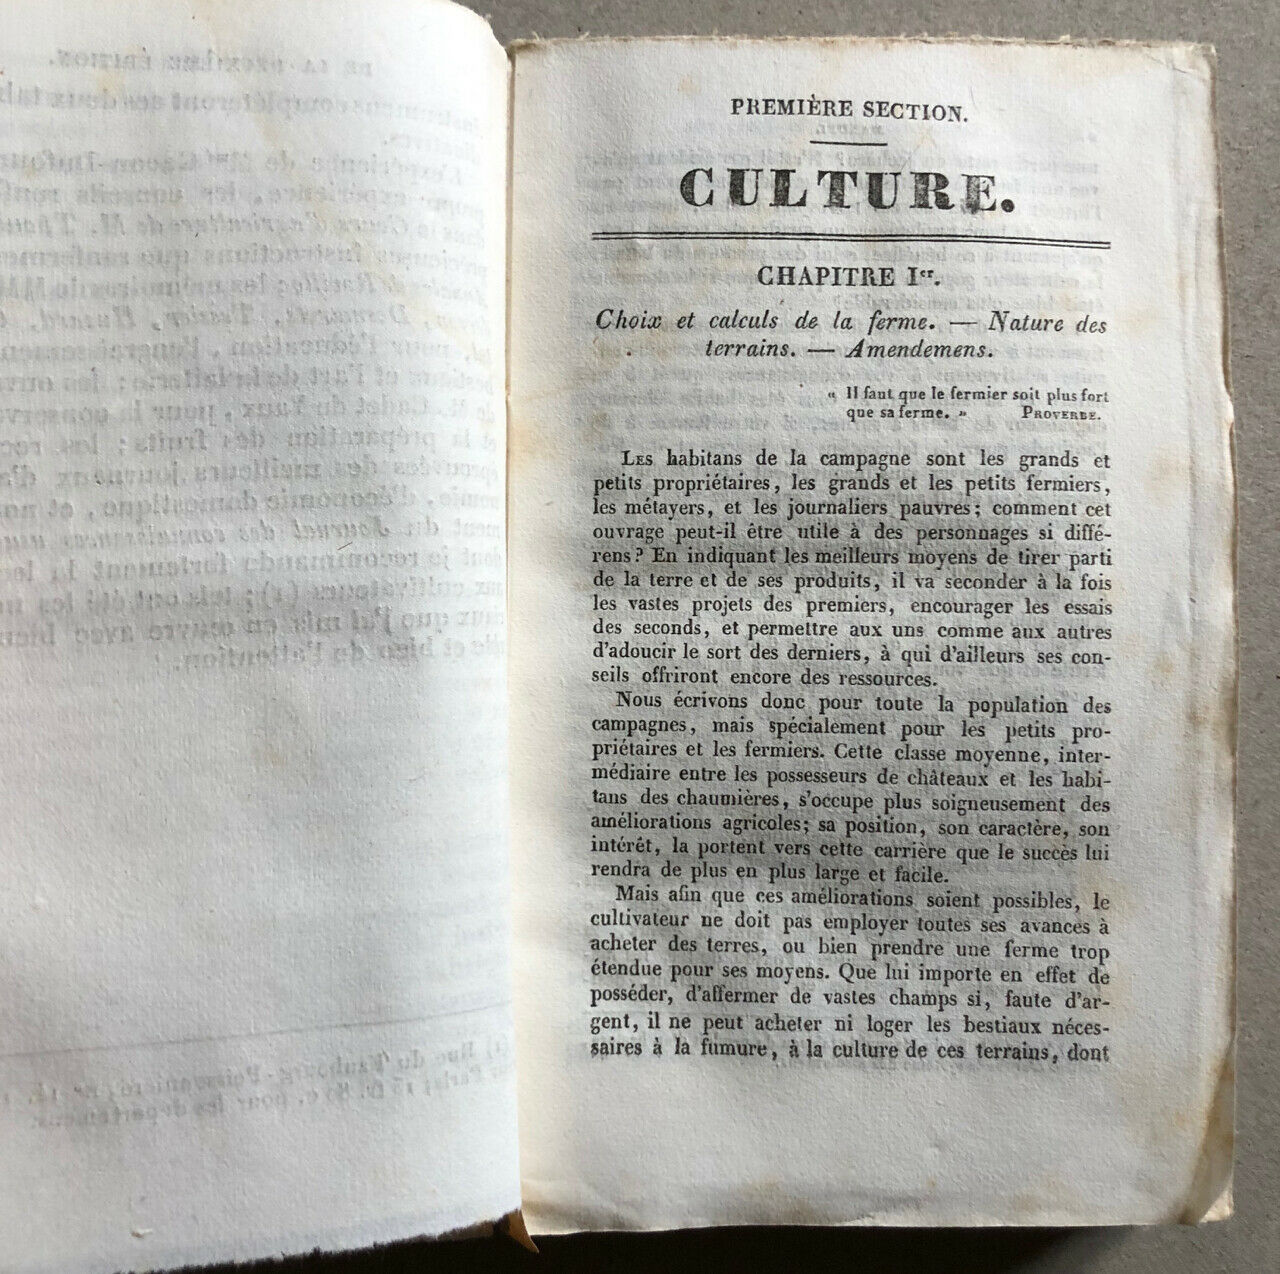 Celnart — Manual of the inhabitants of the countryside — 2nd edition — Roret — 1834.